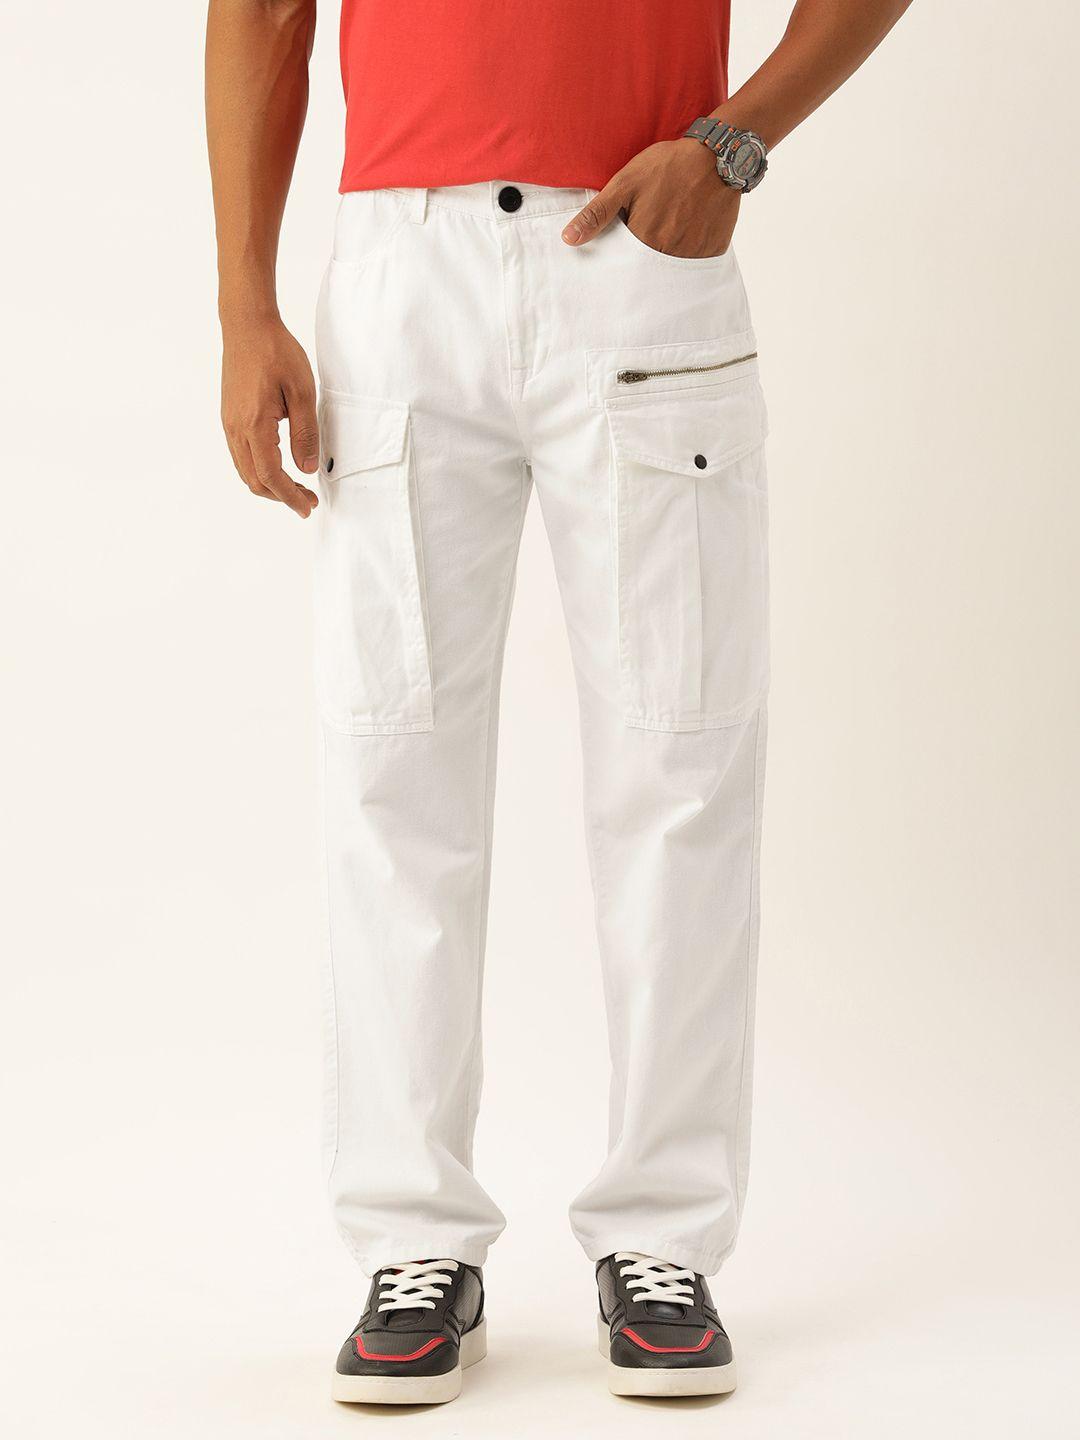 Bene Kleed Men Relaxed Solid Regular Fit Cargos Trousers